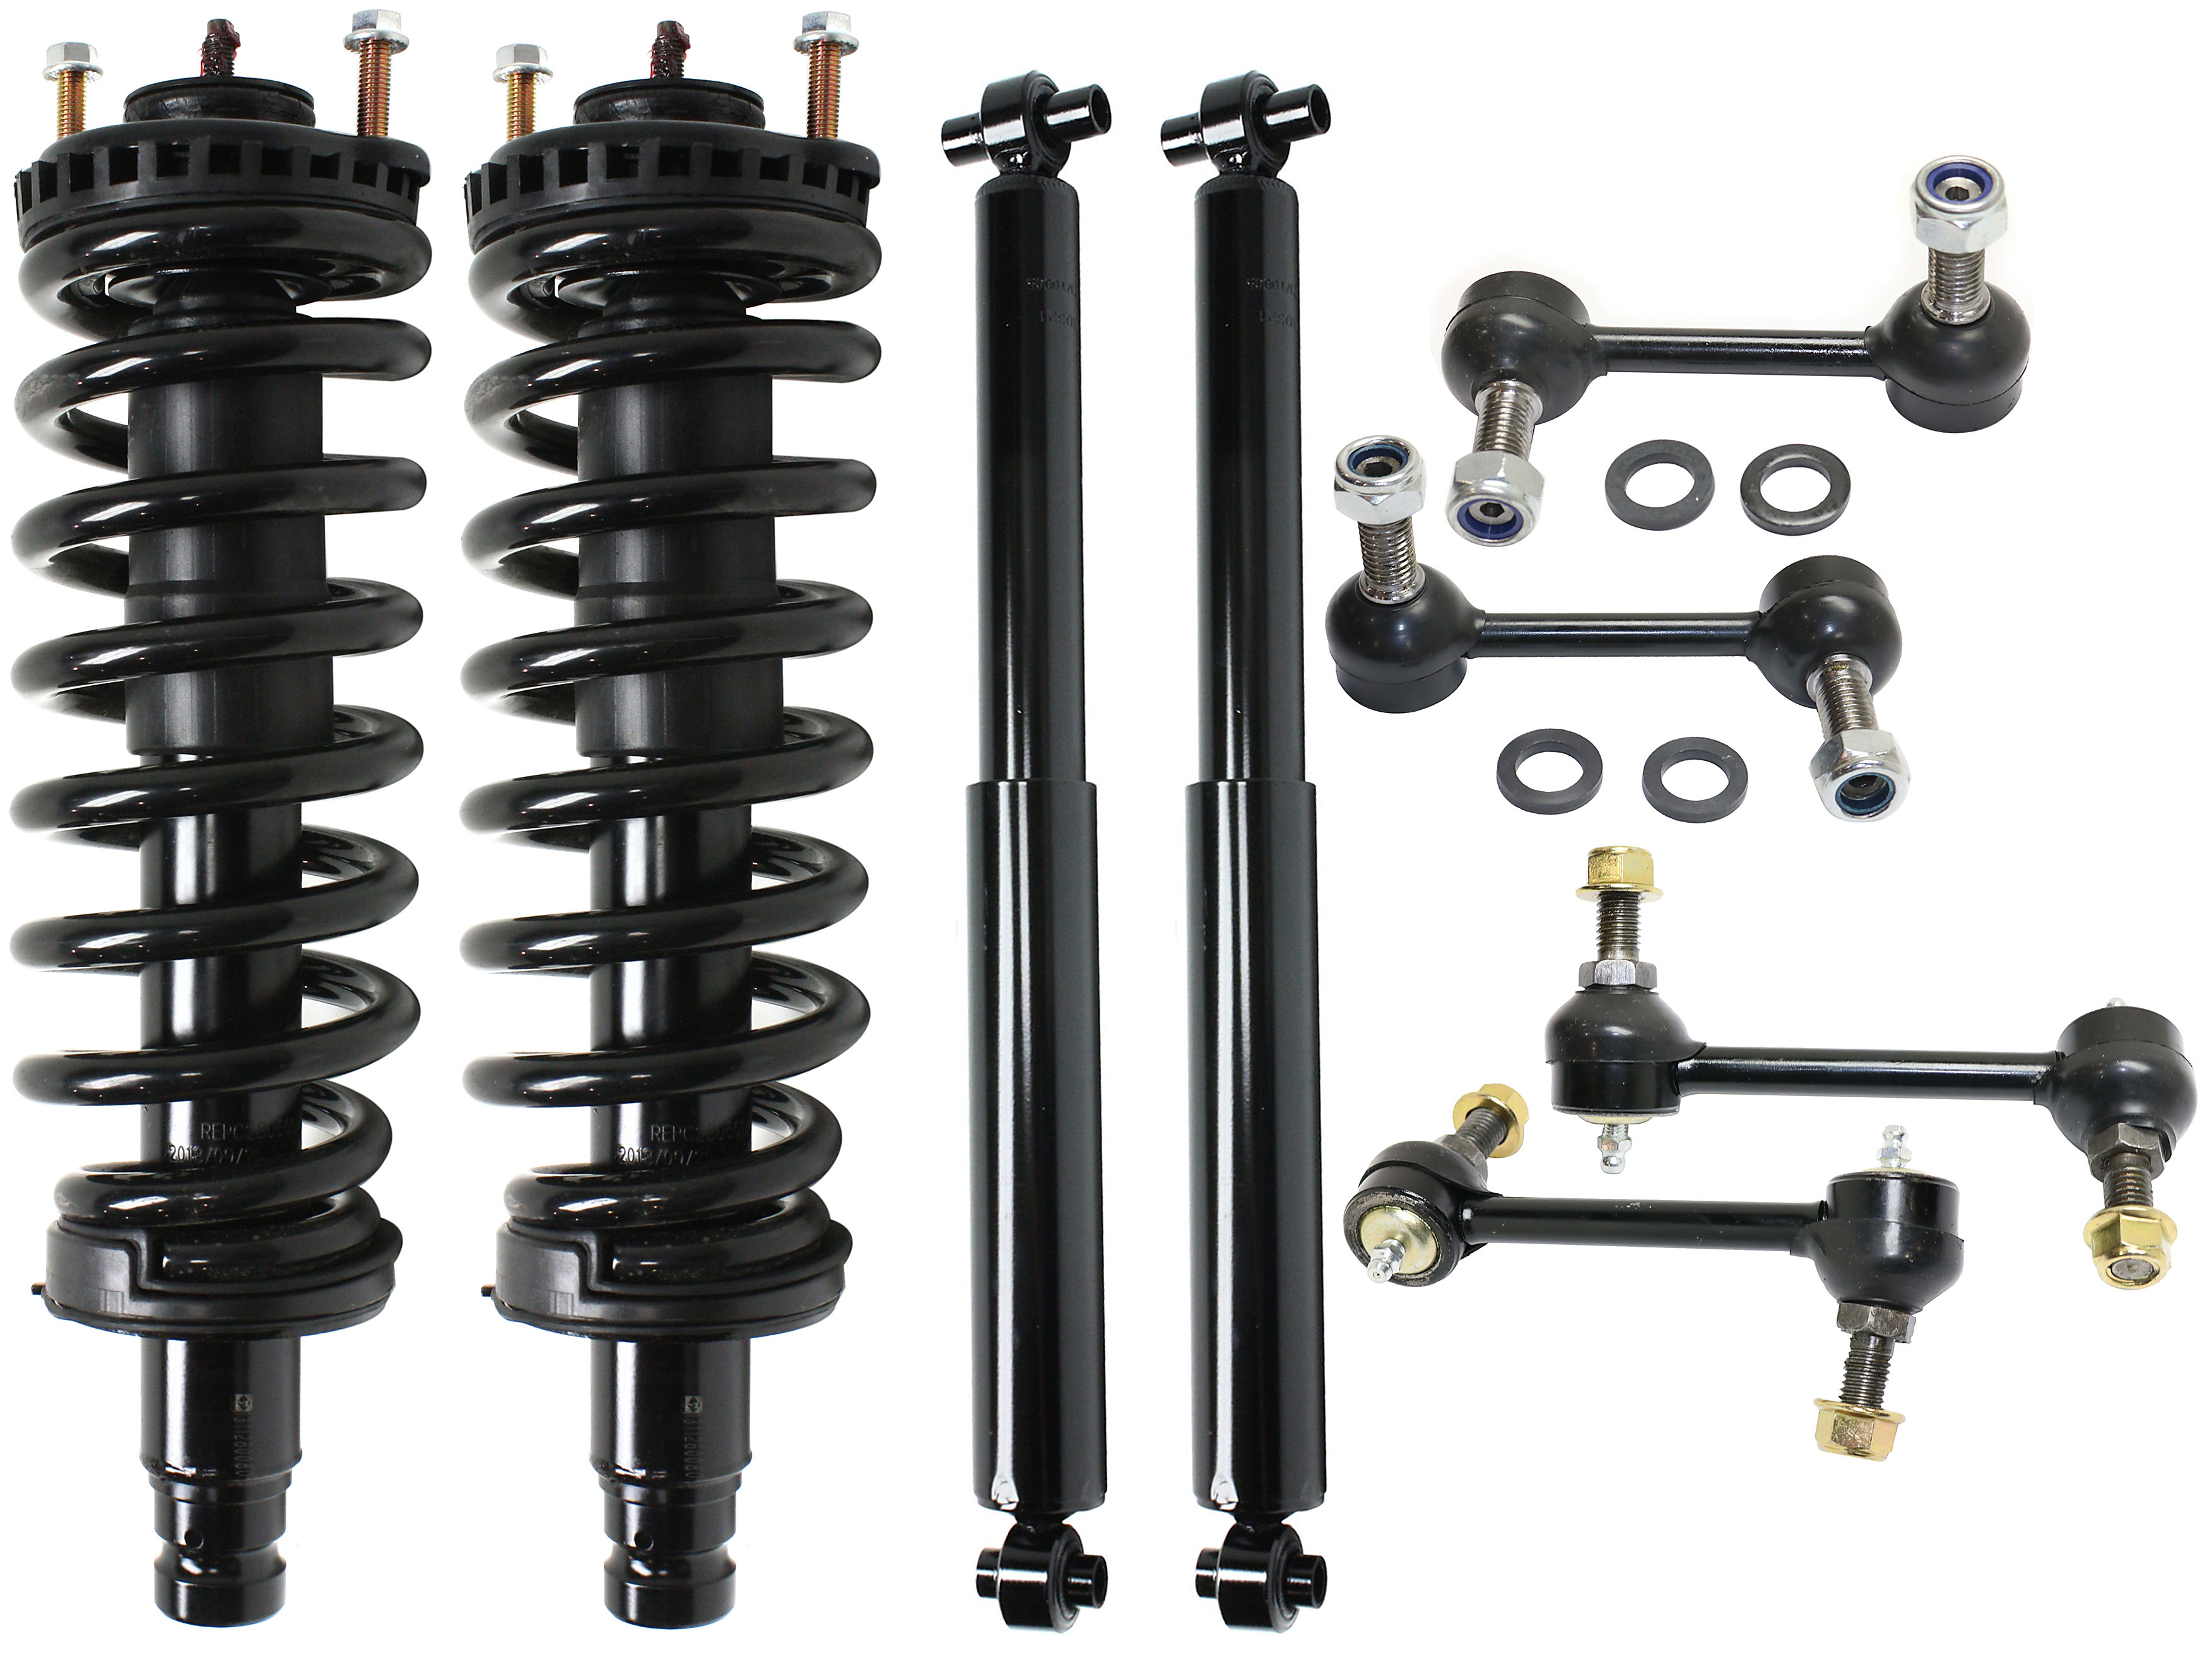 SET-TS181341-C Monroe Shock Absorber and Strut Assemblies Set of 4 New for Chevy